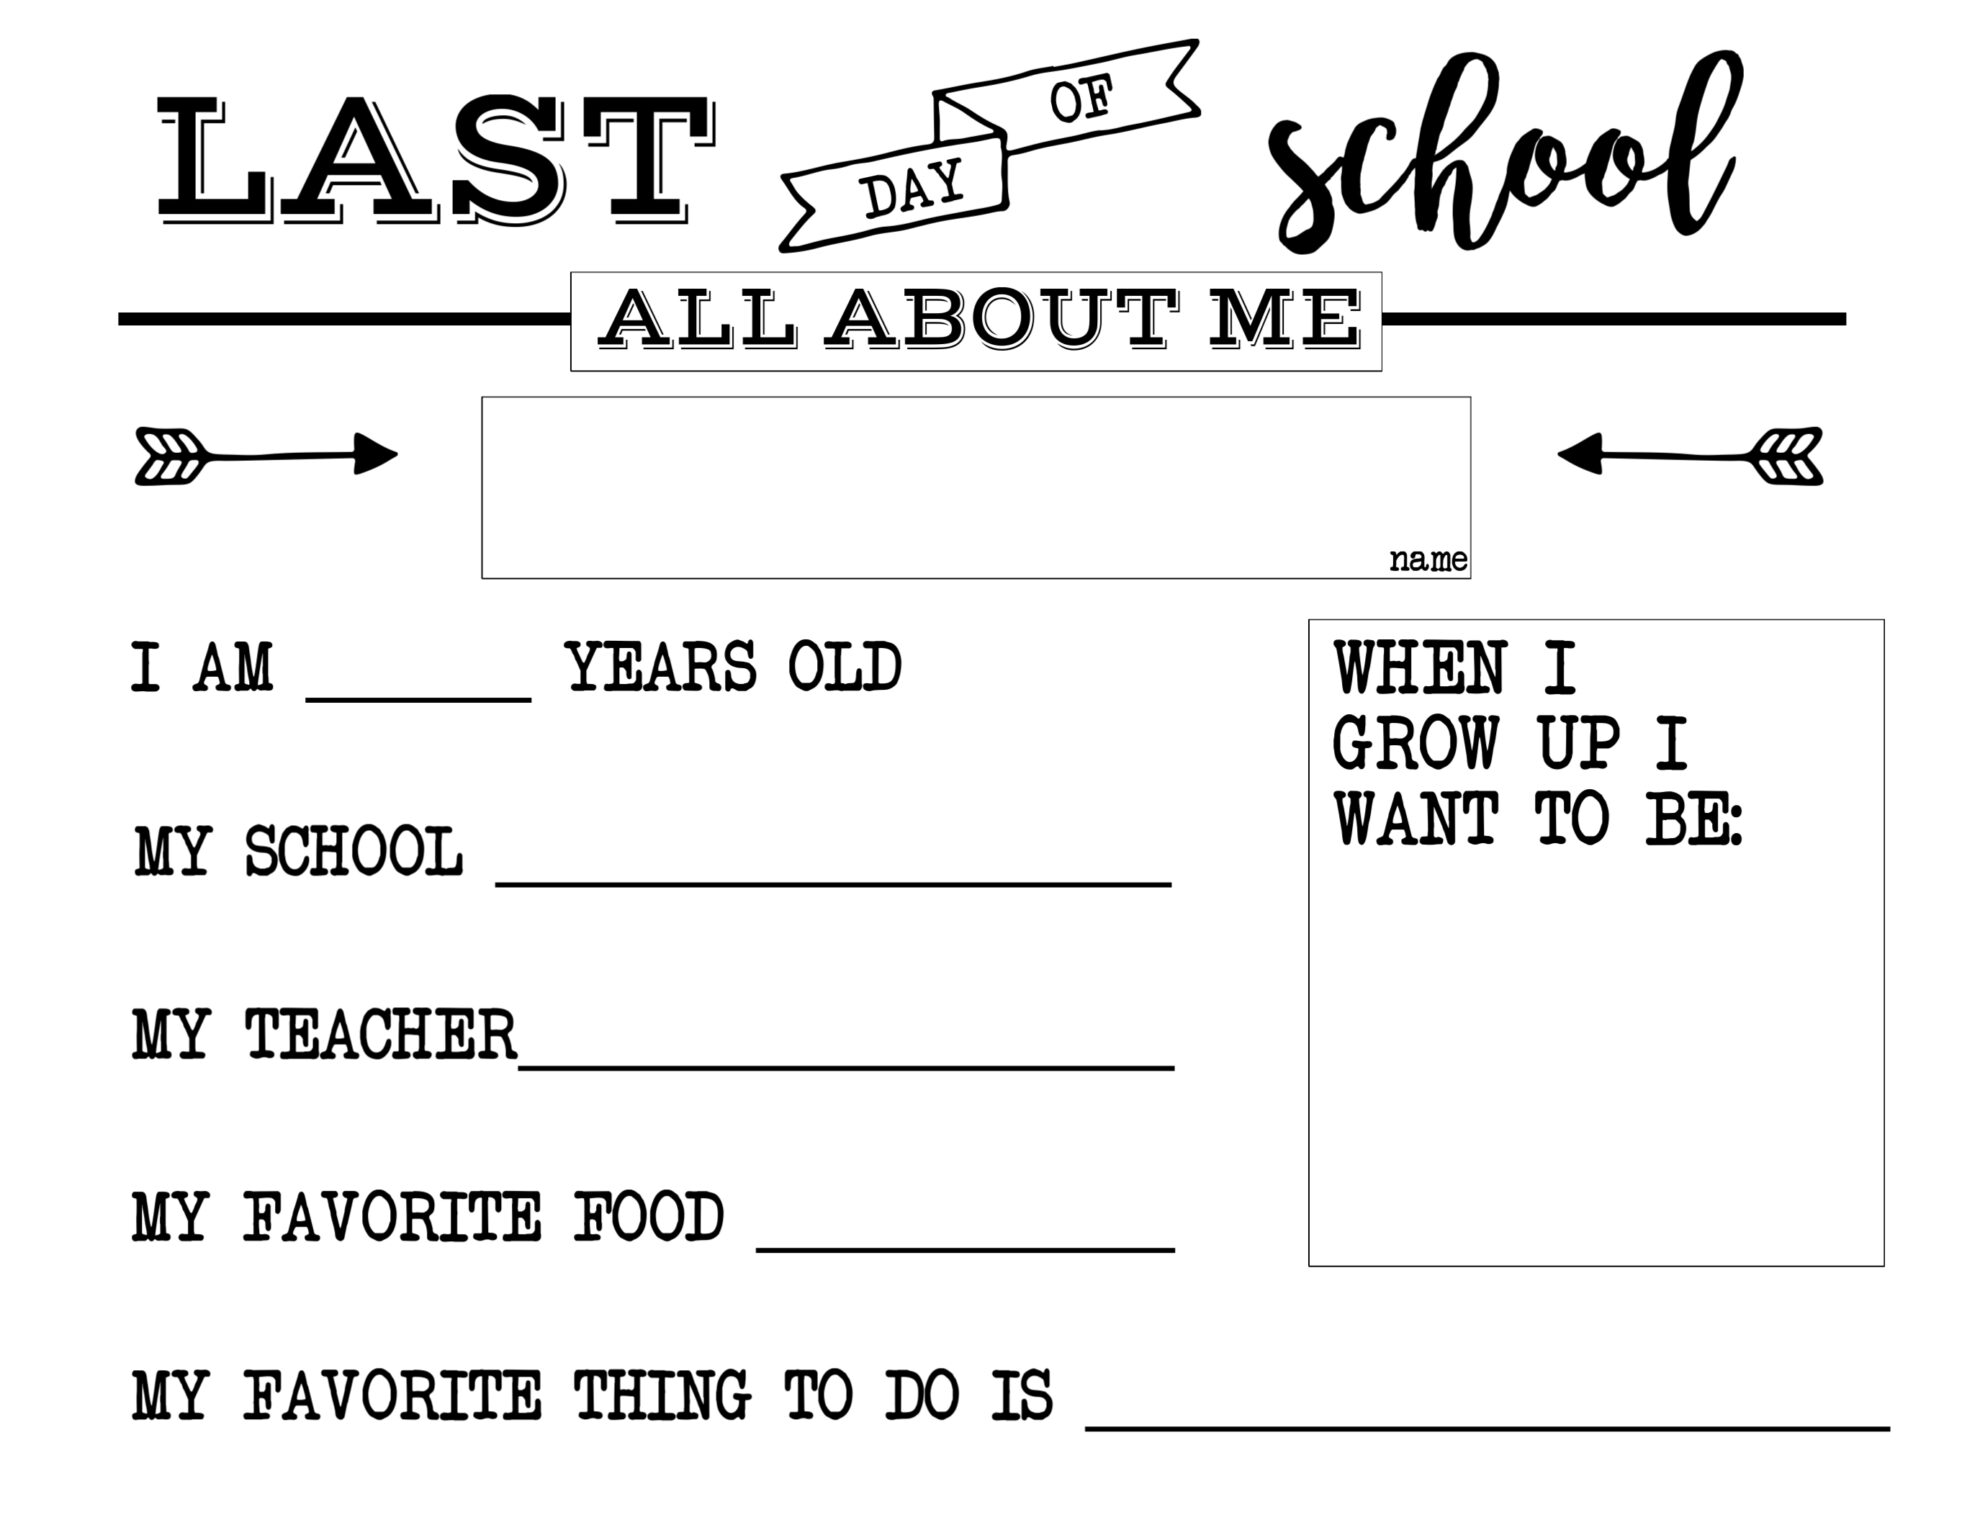 all-about-me-fill-in-the-blank-worksheet-printable-sheet-education